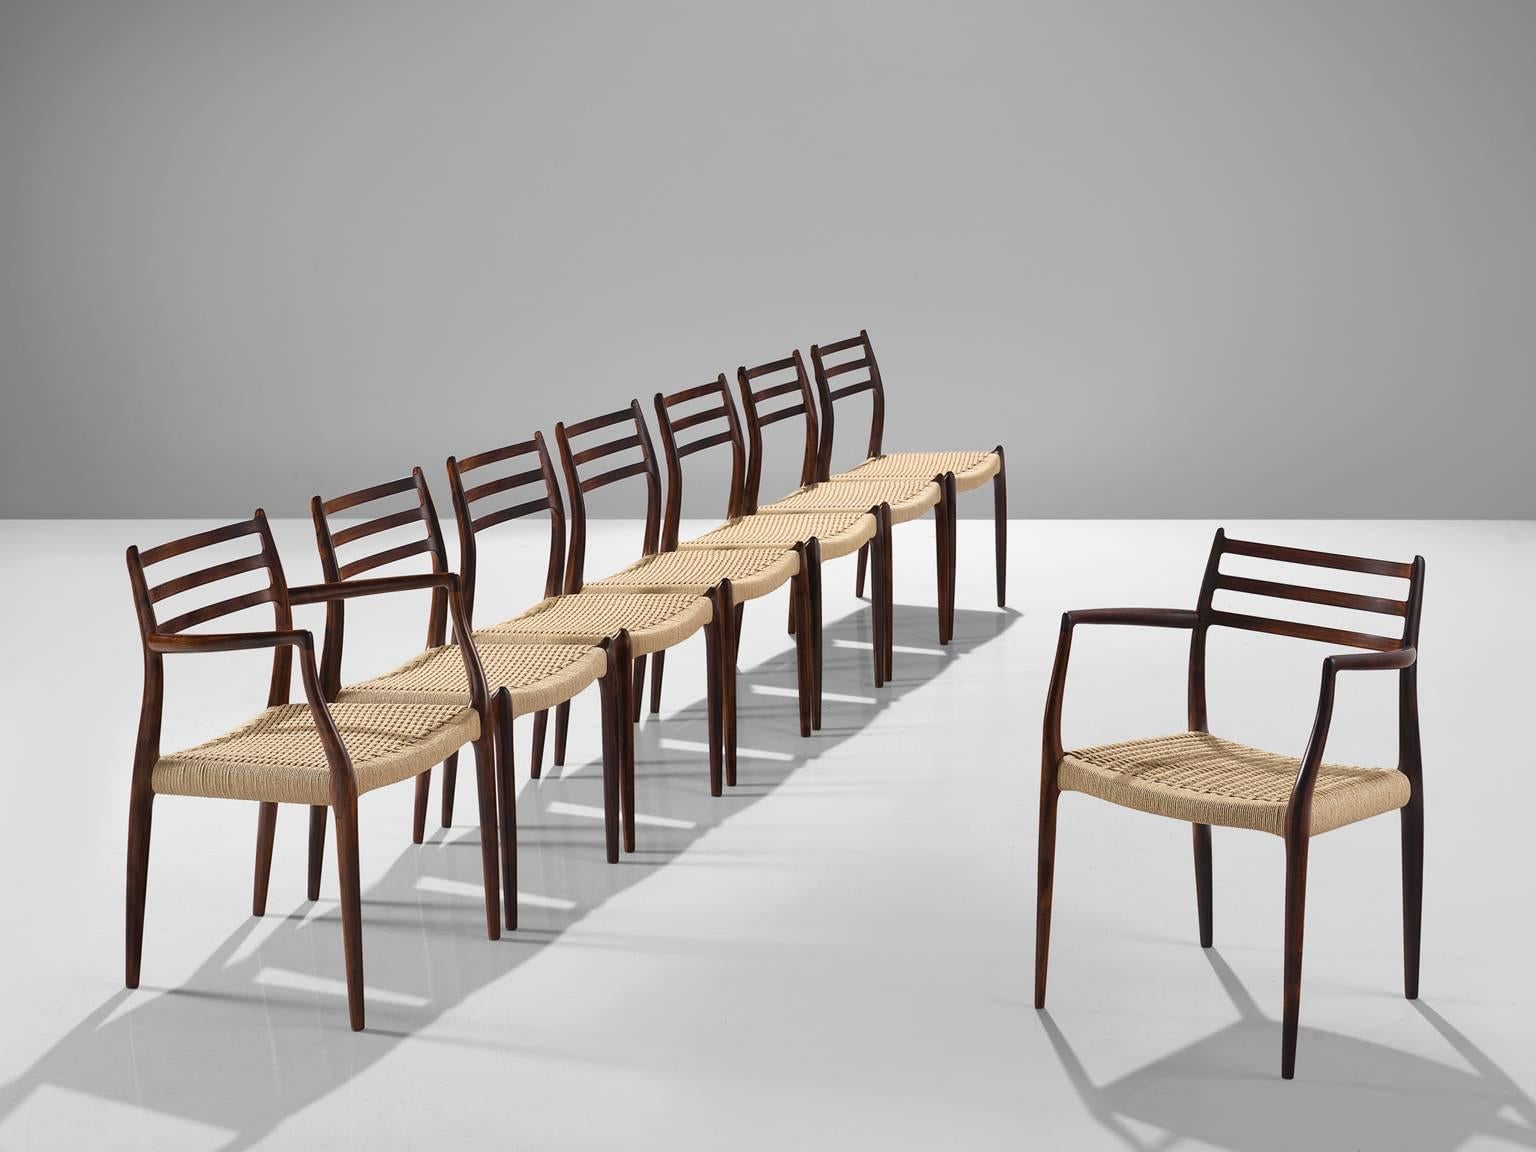 Niels Otto Möller for J.L. Møllers Møbelfabrik, set of eight dining chairs model 85 and two armchairs model 62, rosewood and wickered cane, Denmark, 1960s.

These iconic dining chairs by Möller are upholstered with cane by our upholstery studio.